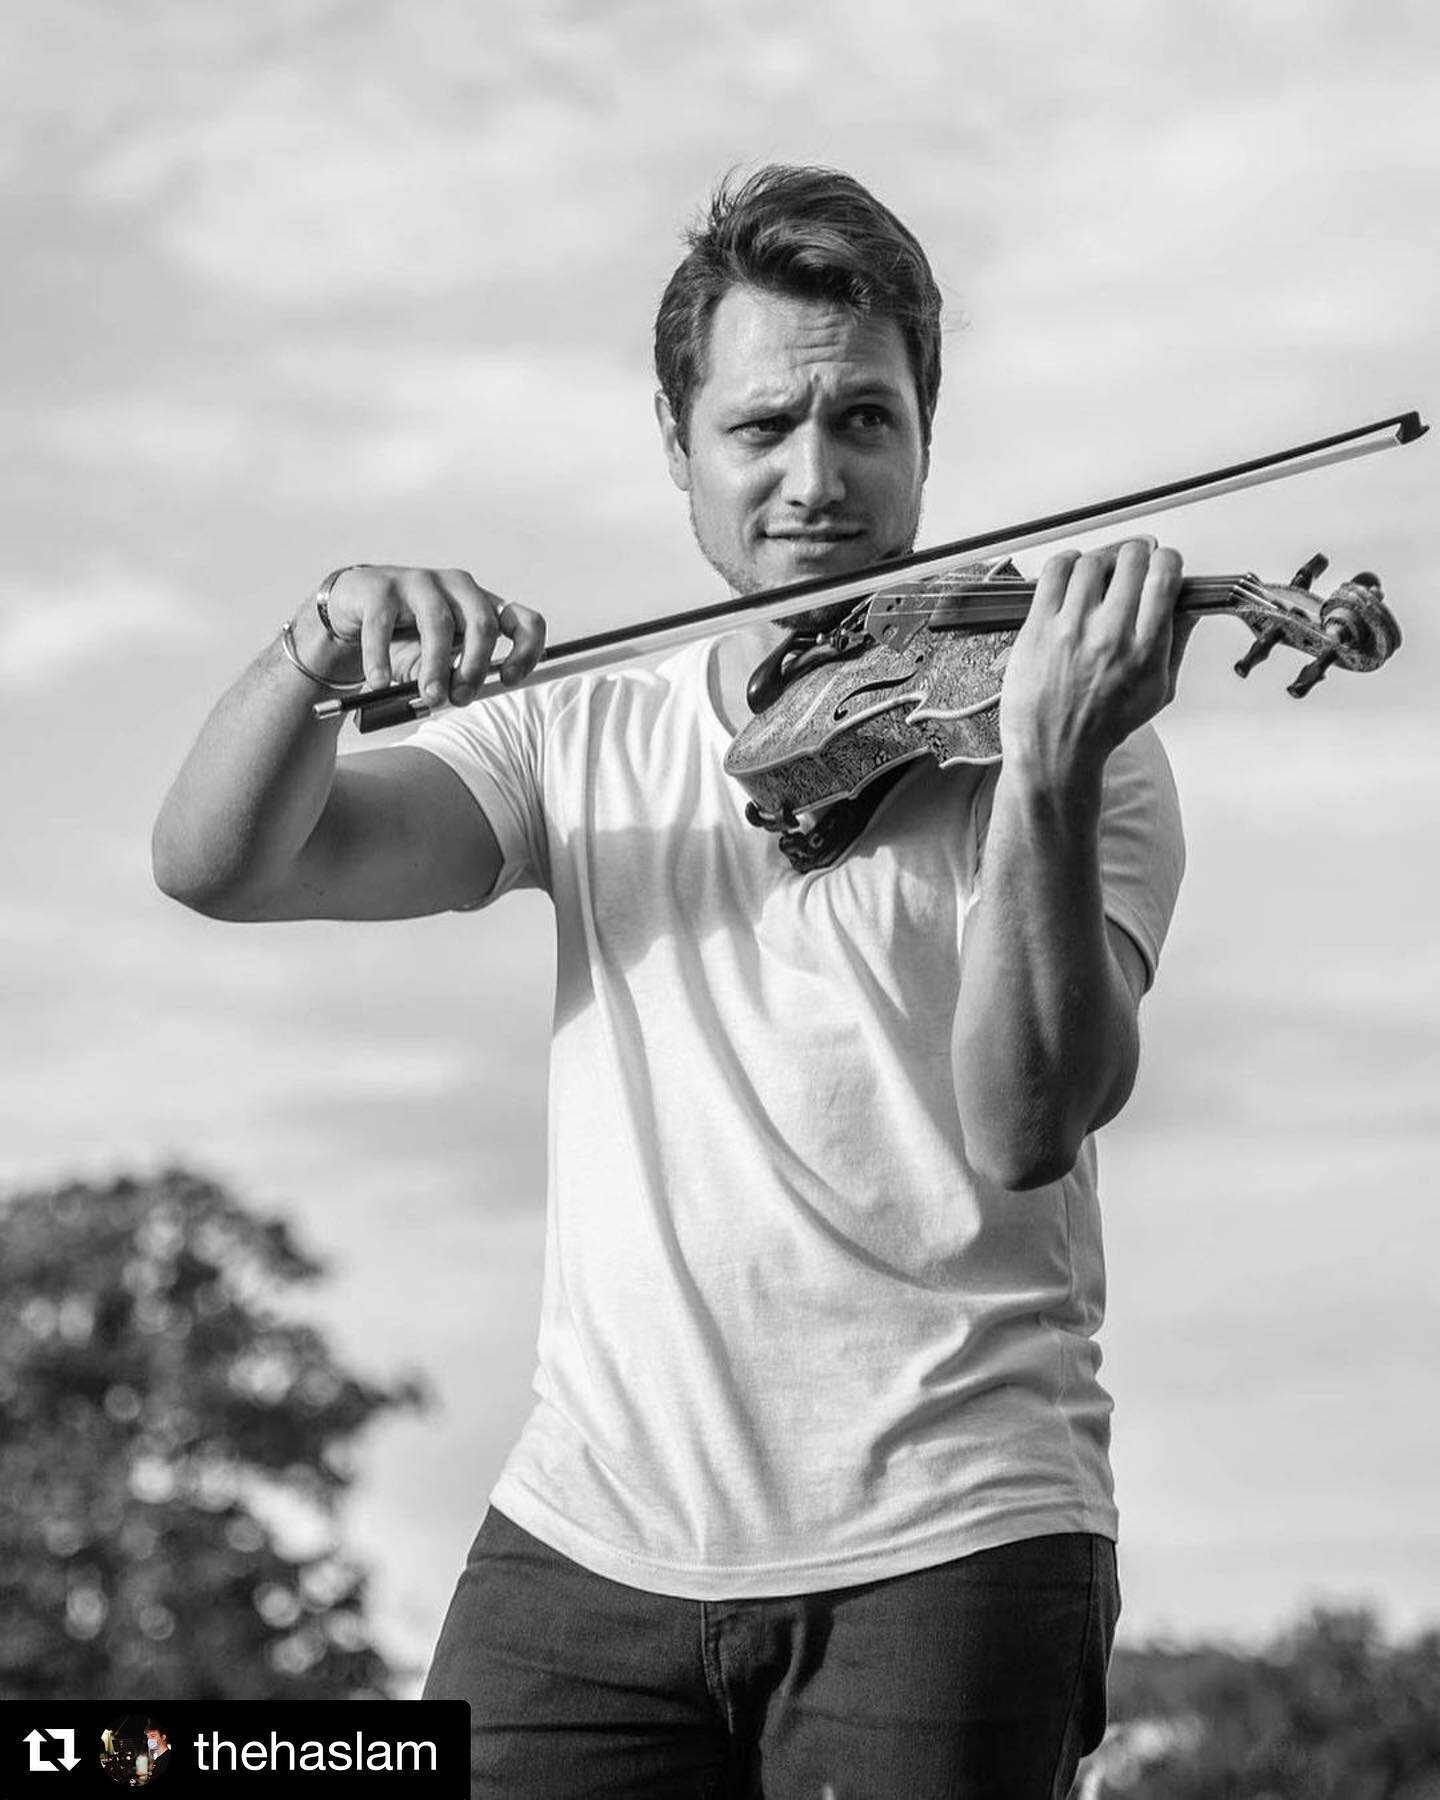 As my friend @thehaslam said:
&ldquo;Bit of a silly shot of mr @violin_bar from a shoot a few weeks ago 😁&rdquo;
I couldn&rsquo;t agree more. But I kinda like it though 😉
.
.
.